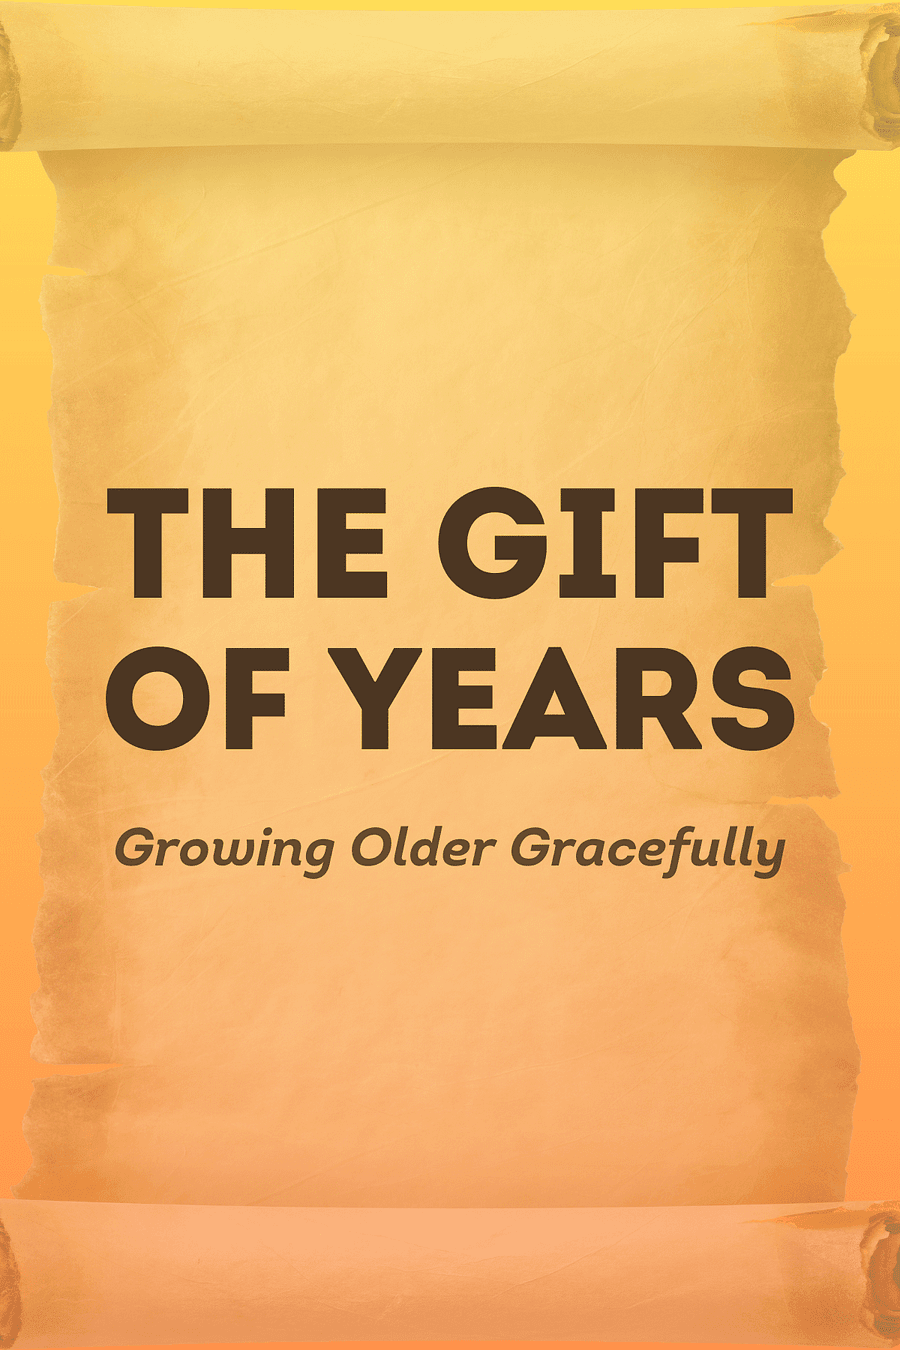 The Gift of Years by Joan Chittister - Book Summary